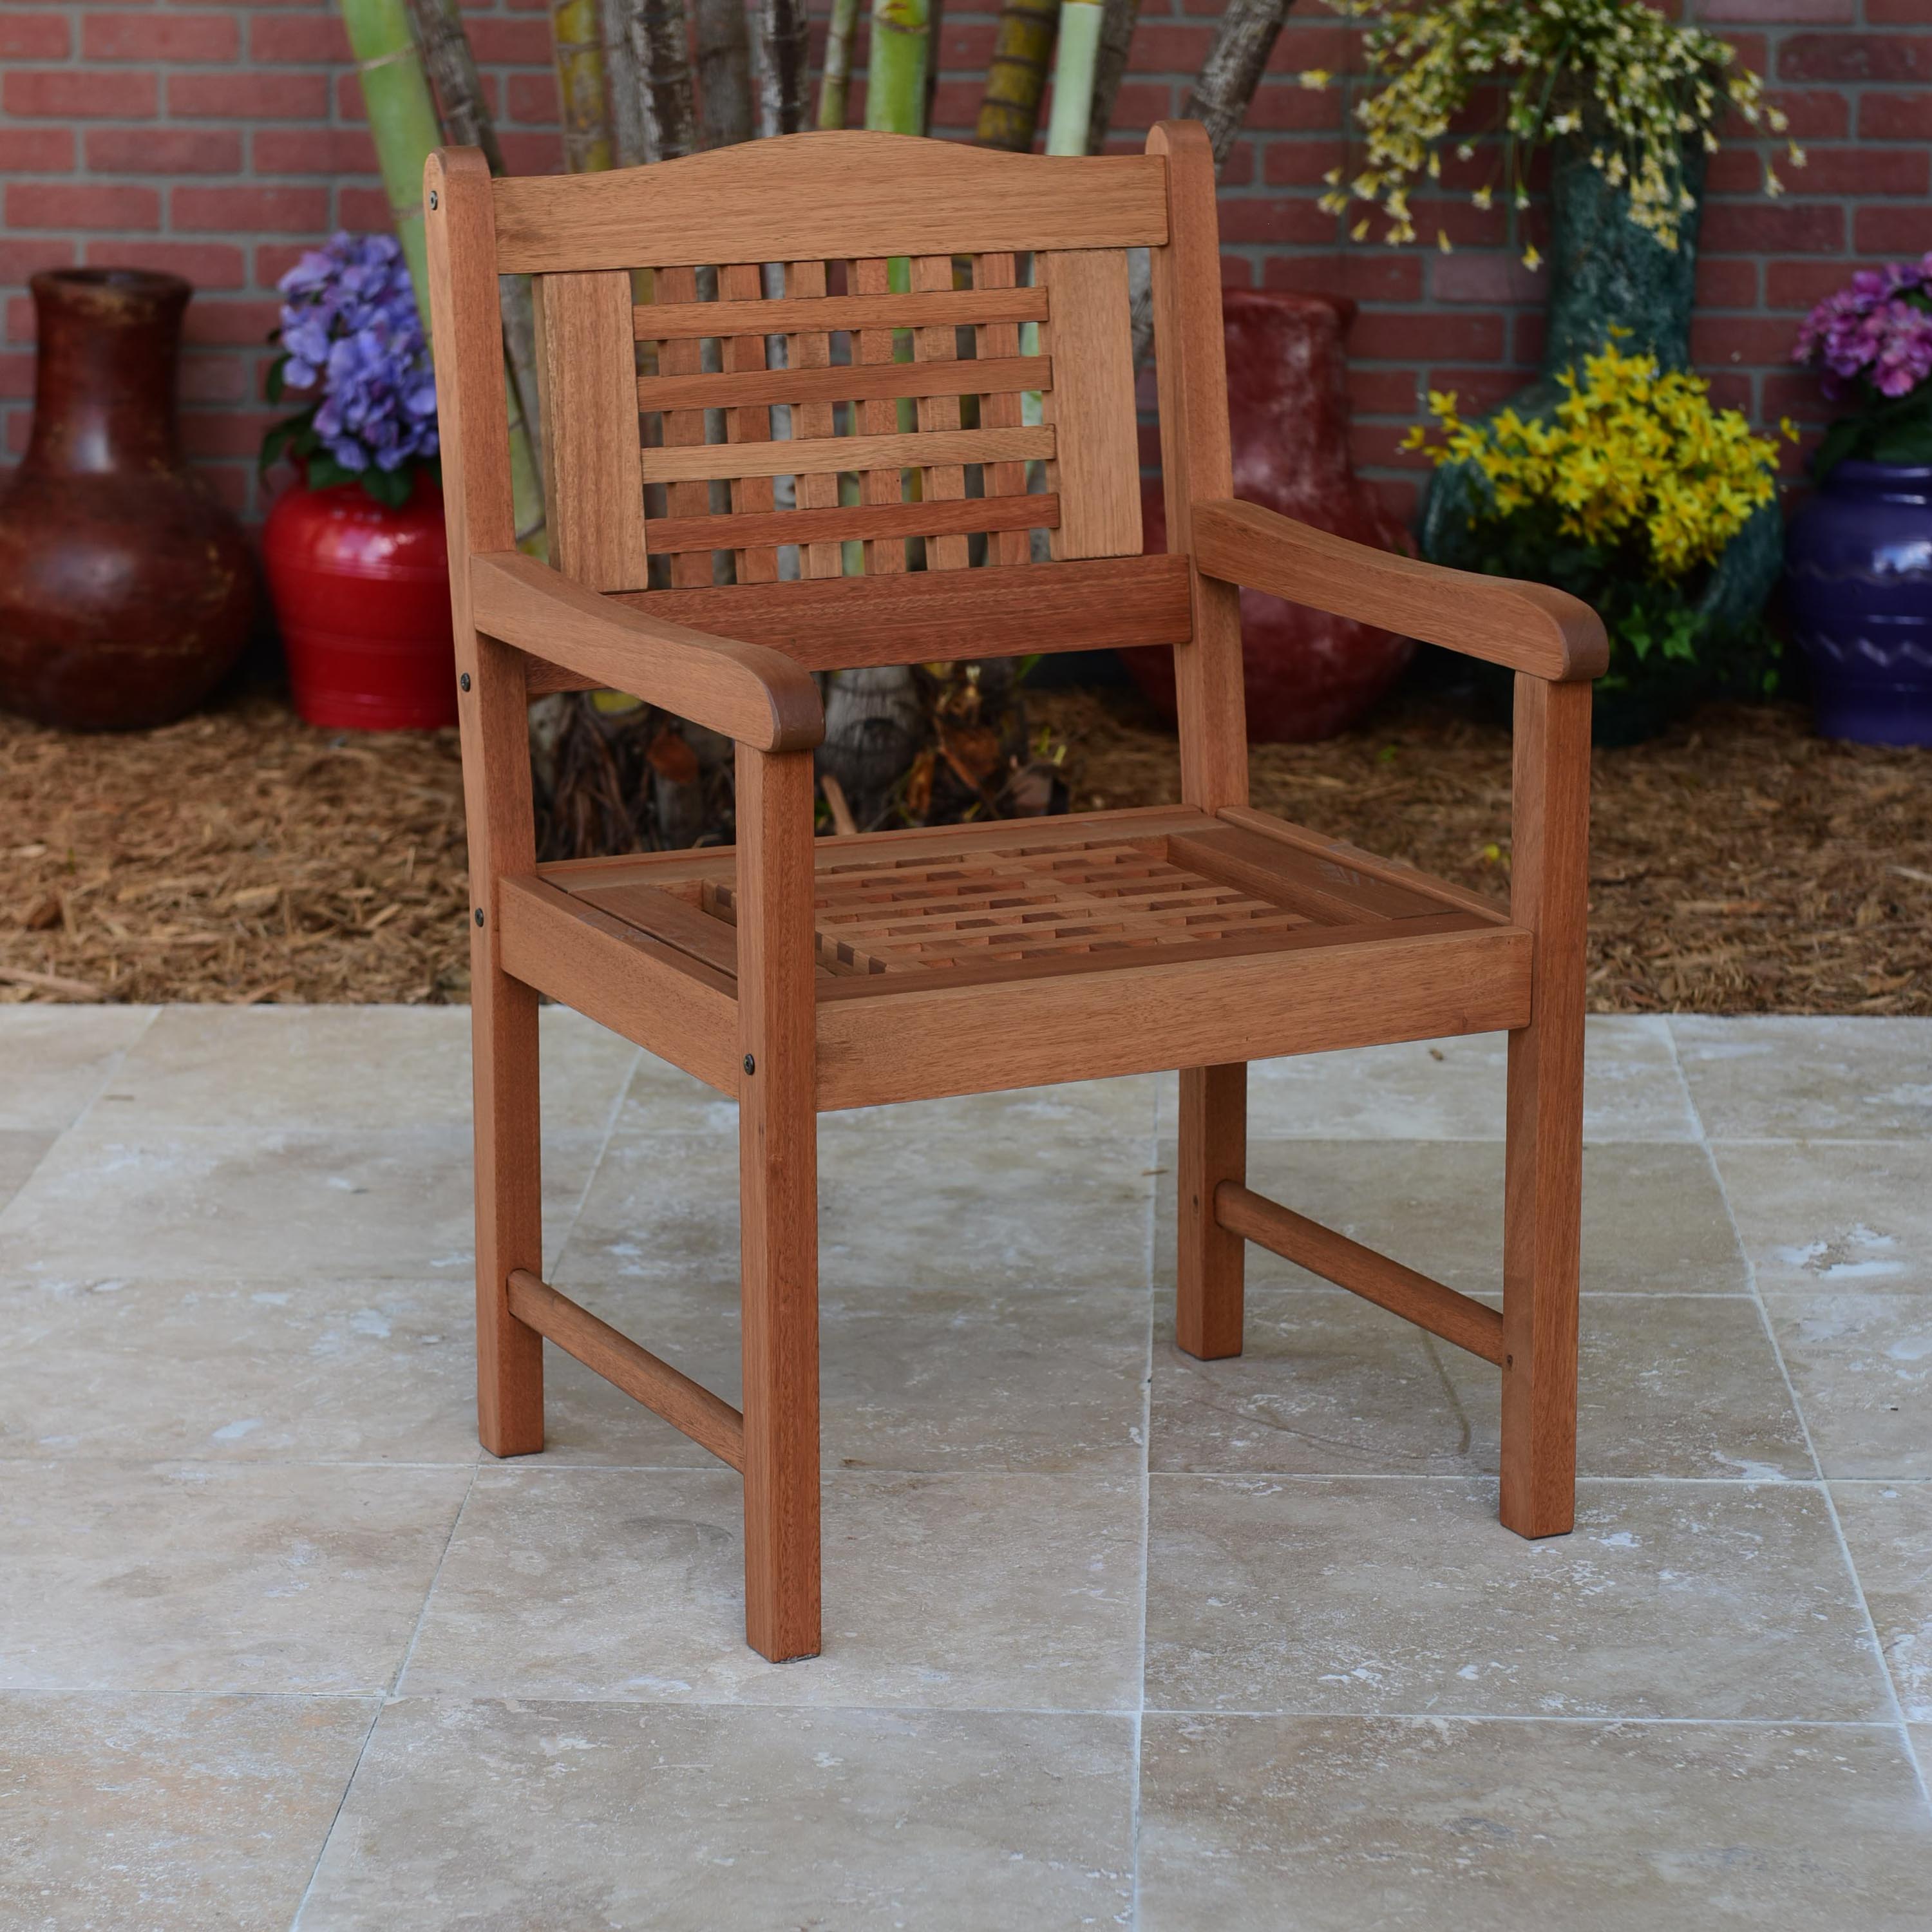 Portoreal 100% FSC Eucalyptus Wood Chair. Ideal for patio, Brown - image 1 of 4